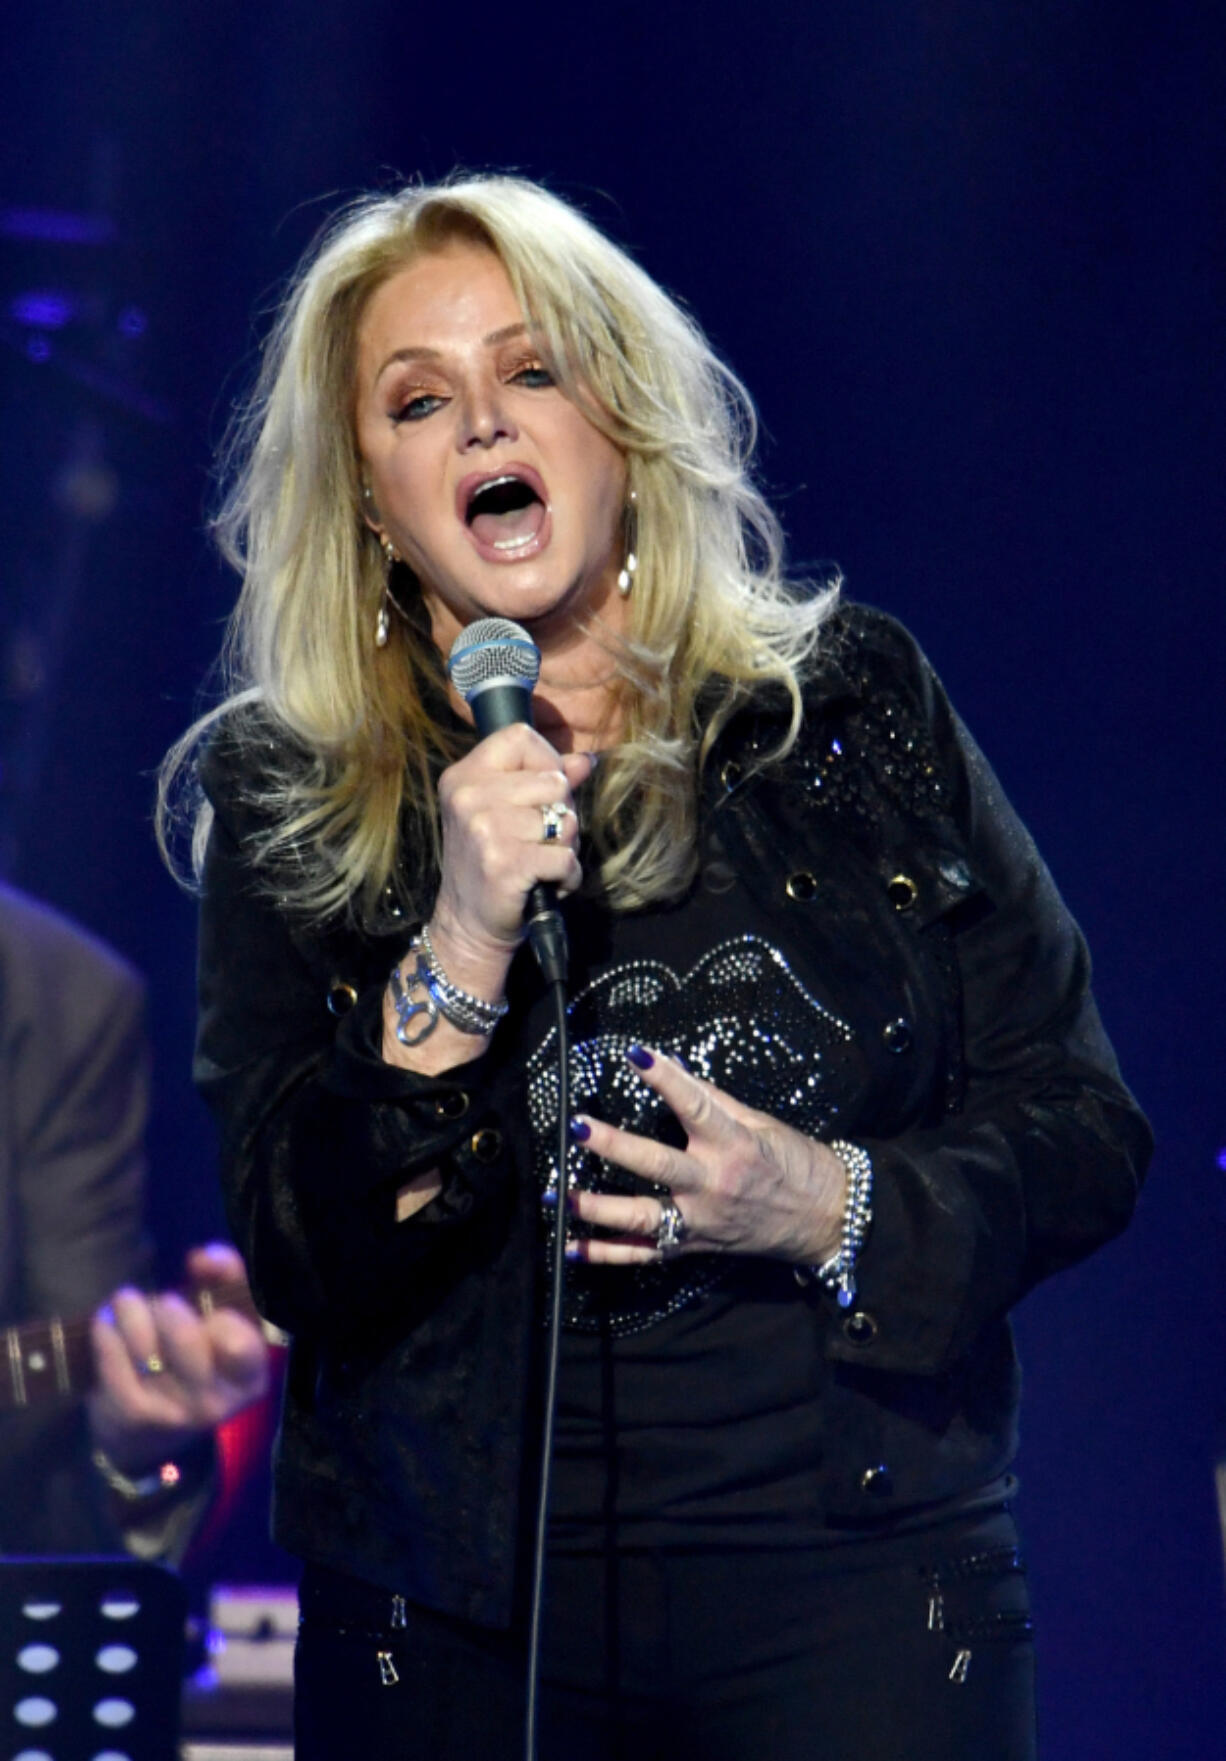 Bonnie Tyler performs on stage during Music For The Marsden 2020 at The O2 Arena on March 3, 2020, in London. Her song &ldquo;Total Eclipse of the Heart&rdquo; is at the top of The Dallas Morning News&rsquo; playlist for the April 8 eclipse.